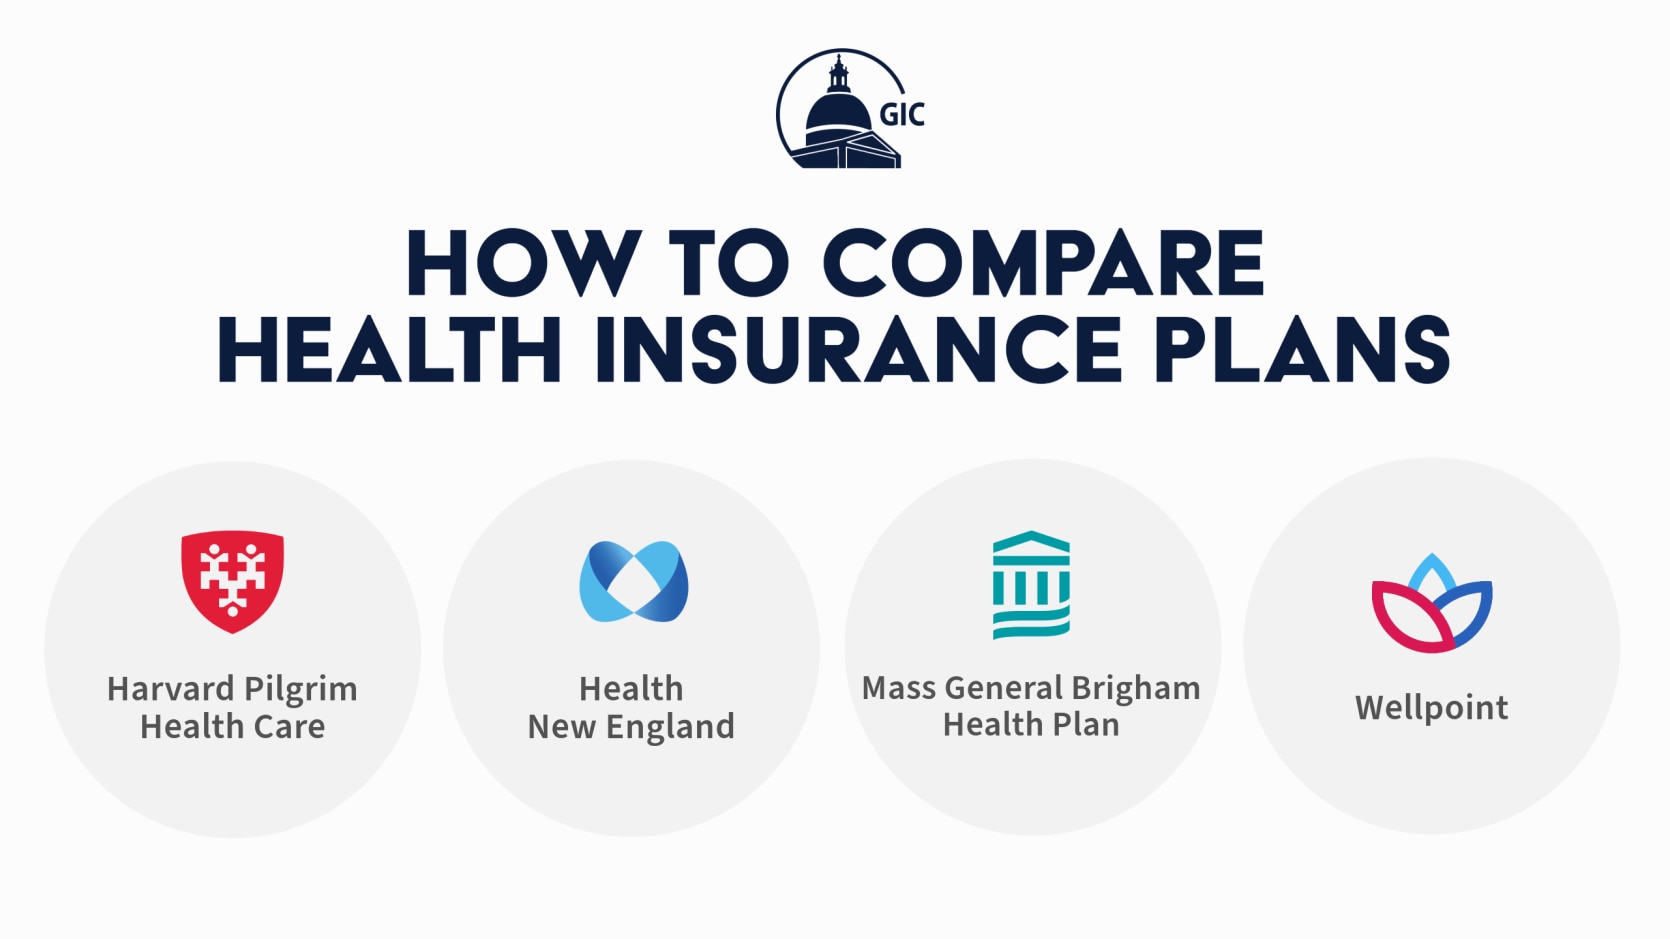 How to Compare Health Insurance Plans